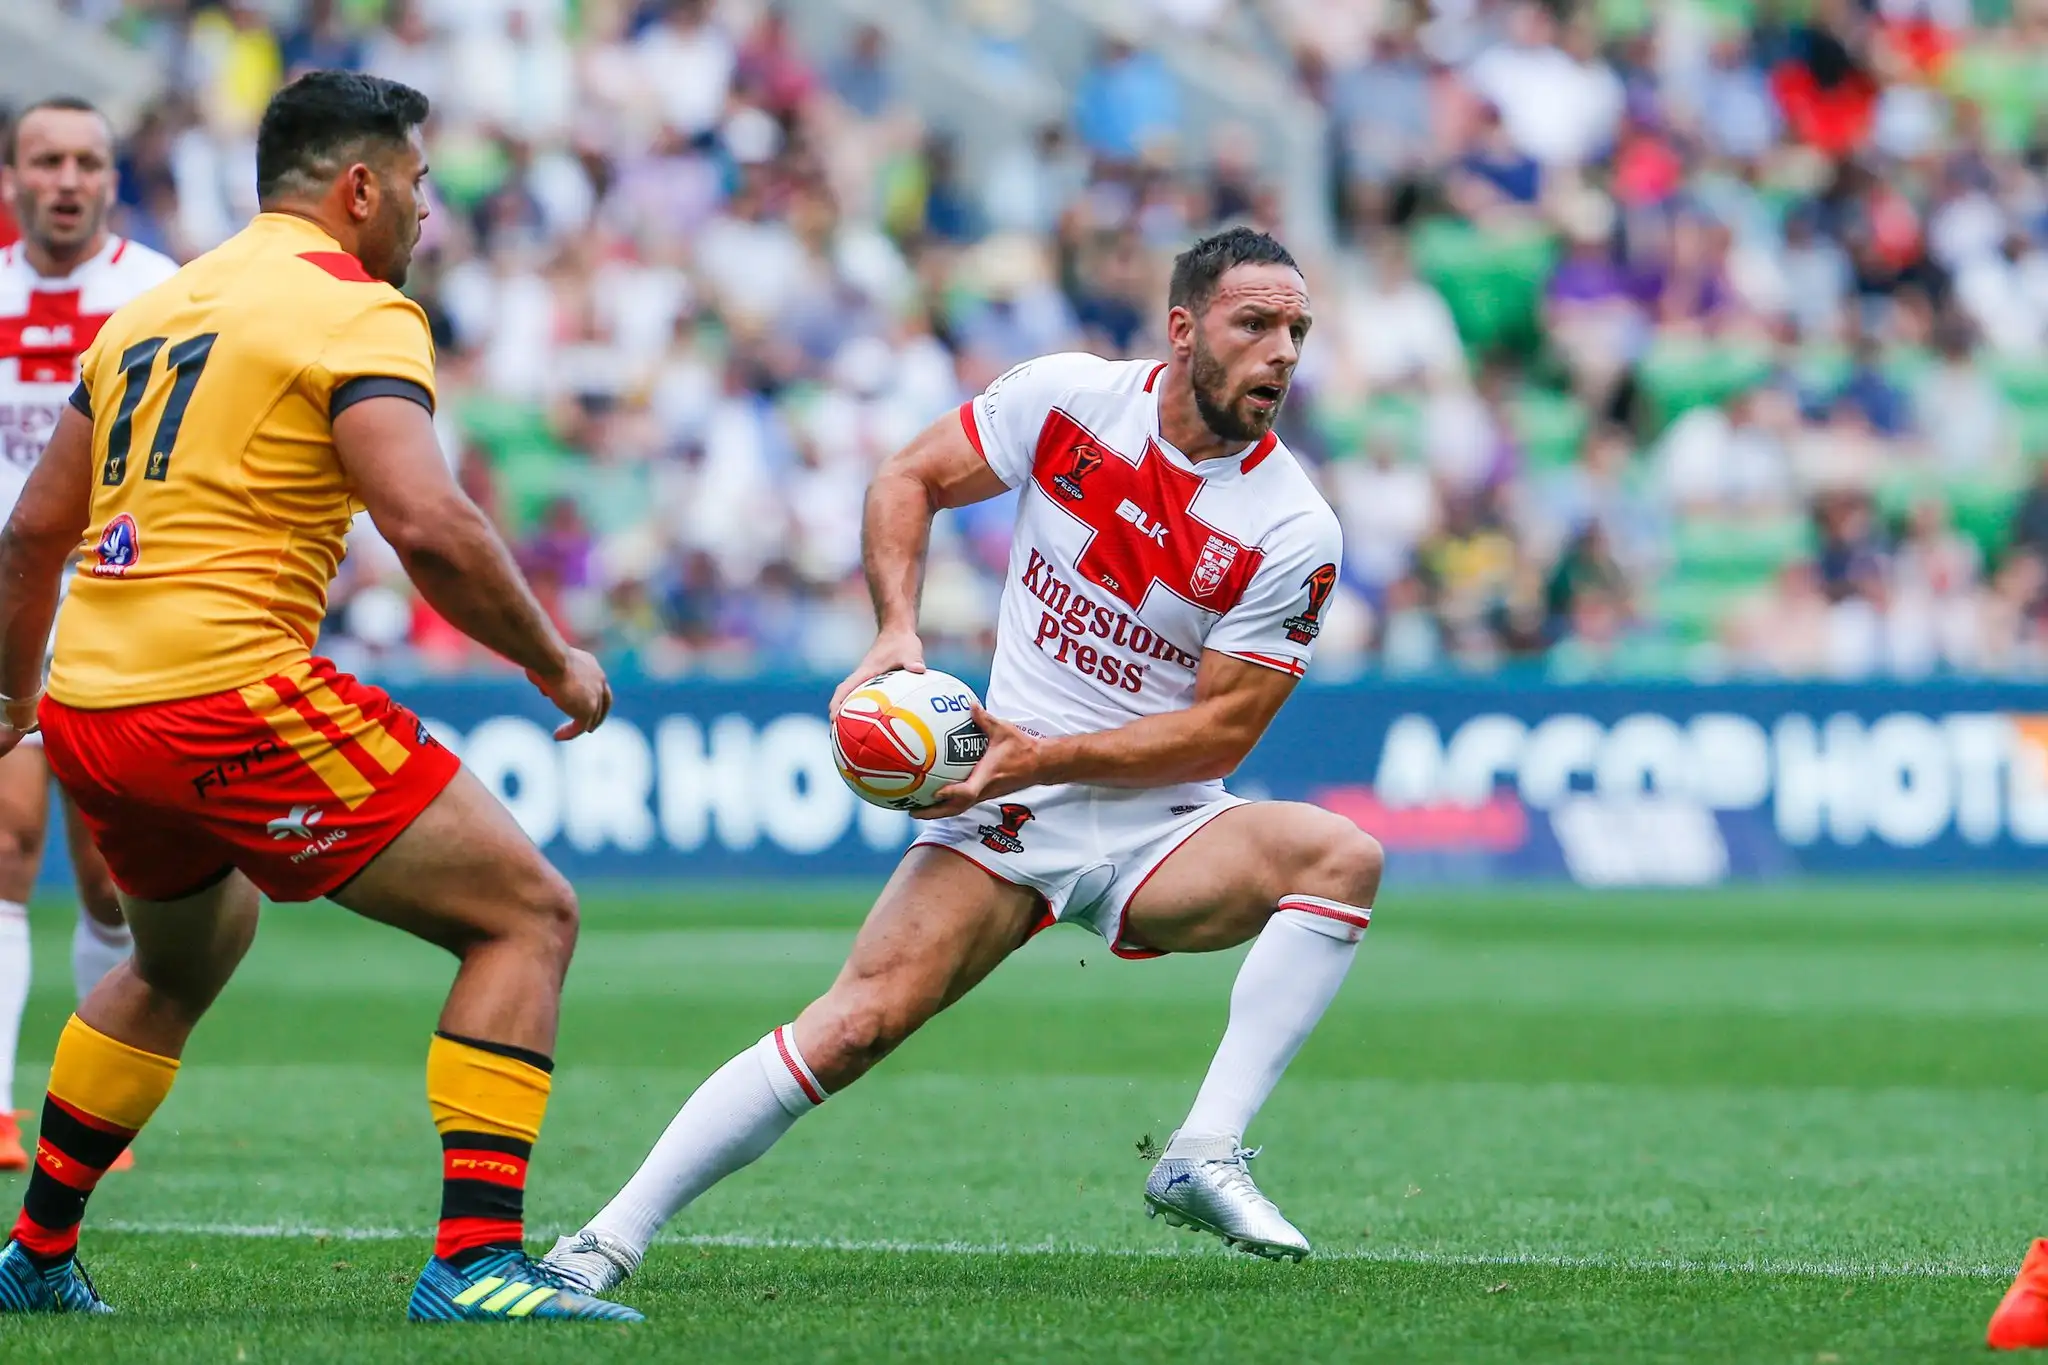 Leeds Rhinos 2020 squad numbers: Luke Gale to wear No. 7 jersey